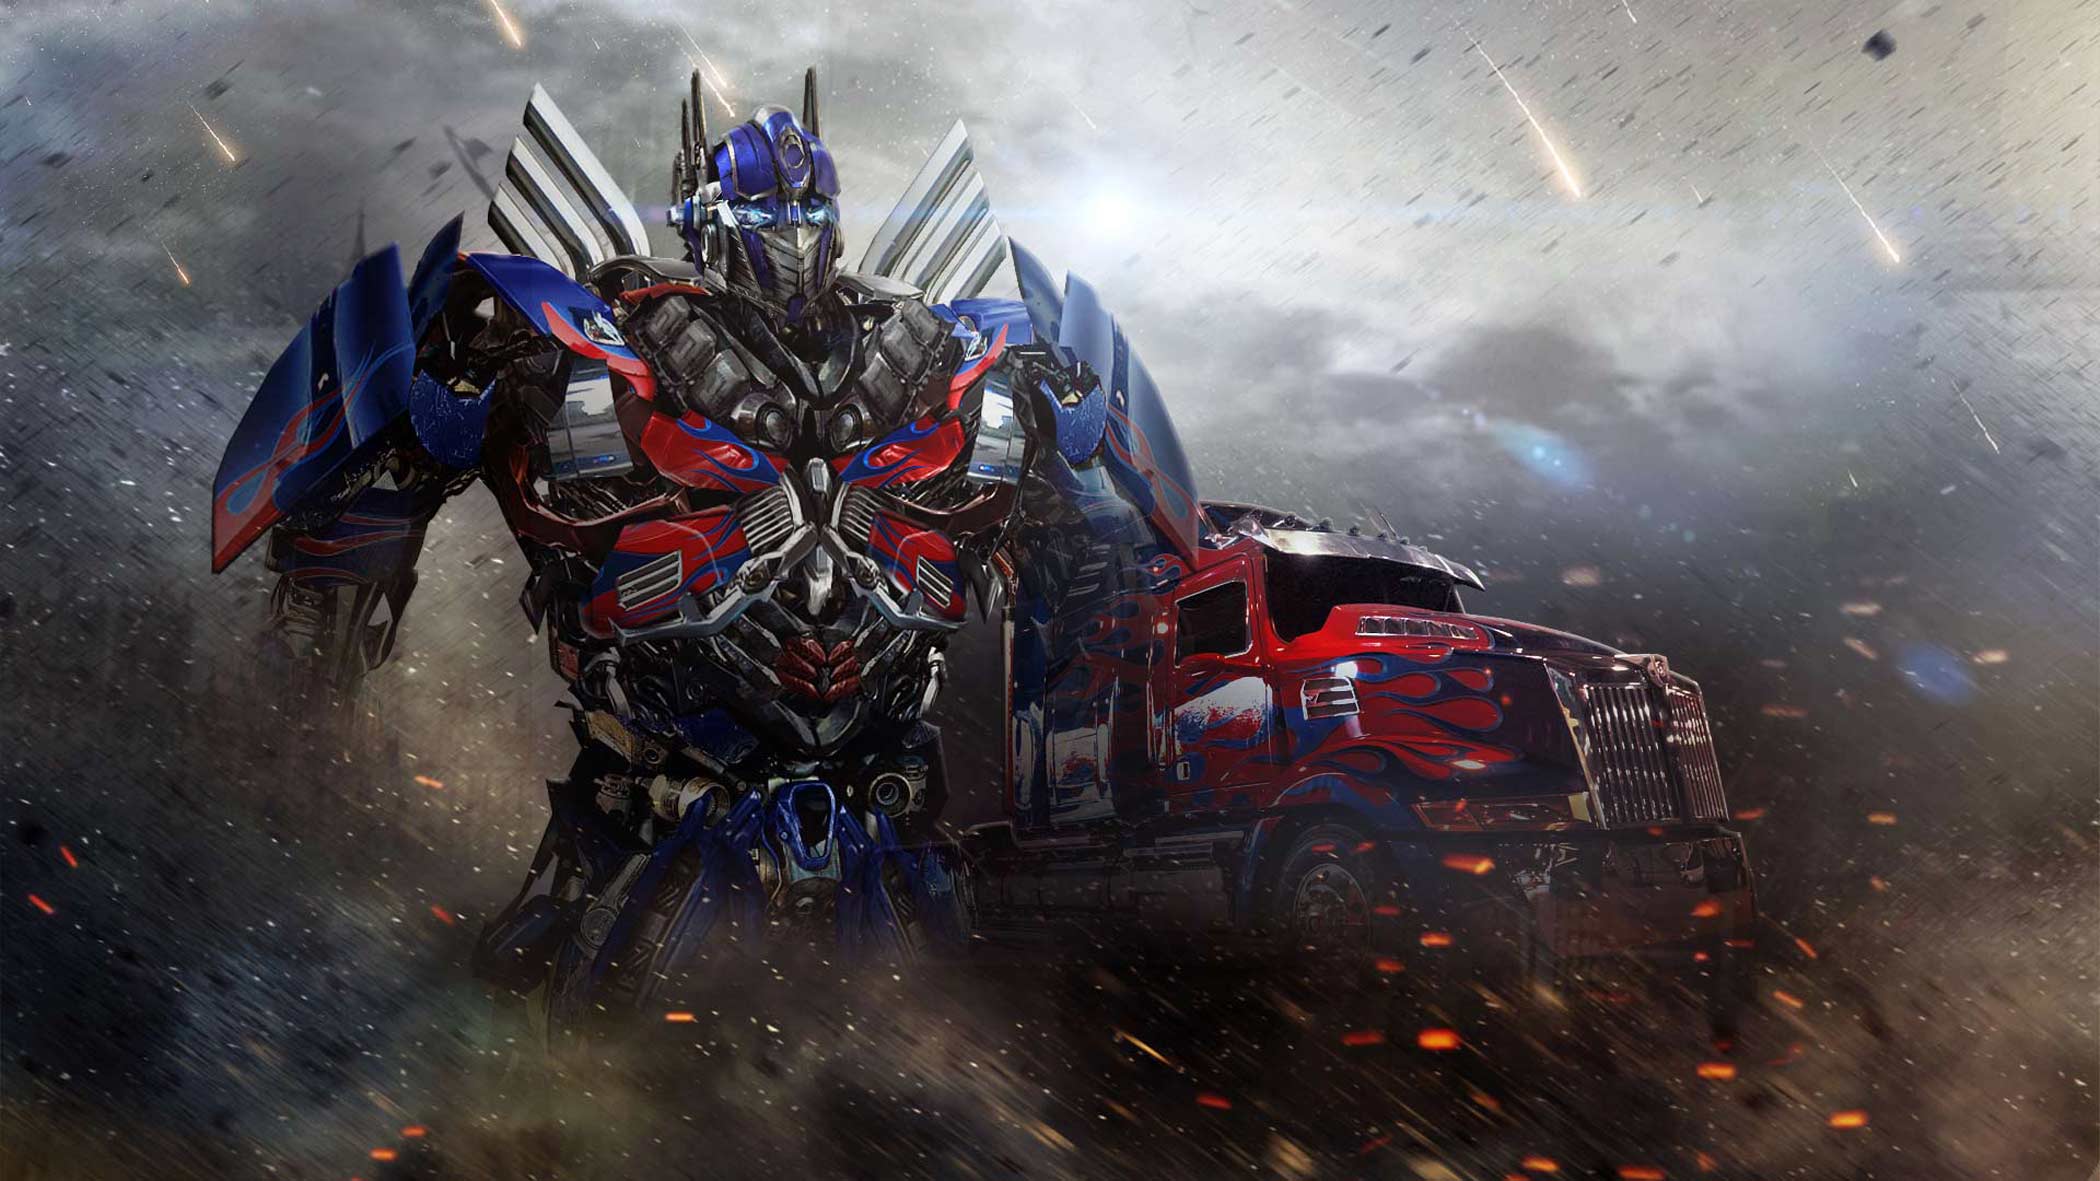 transformers 5 age of extinction full movie free